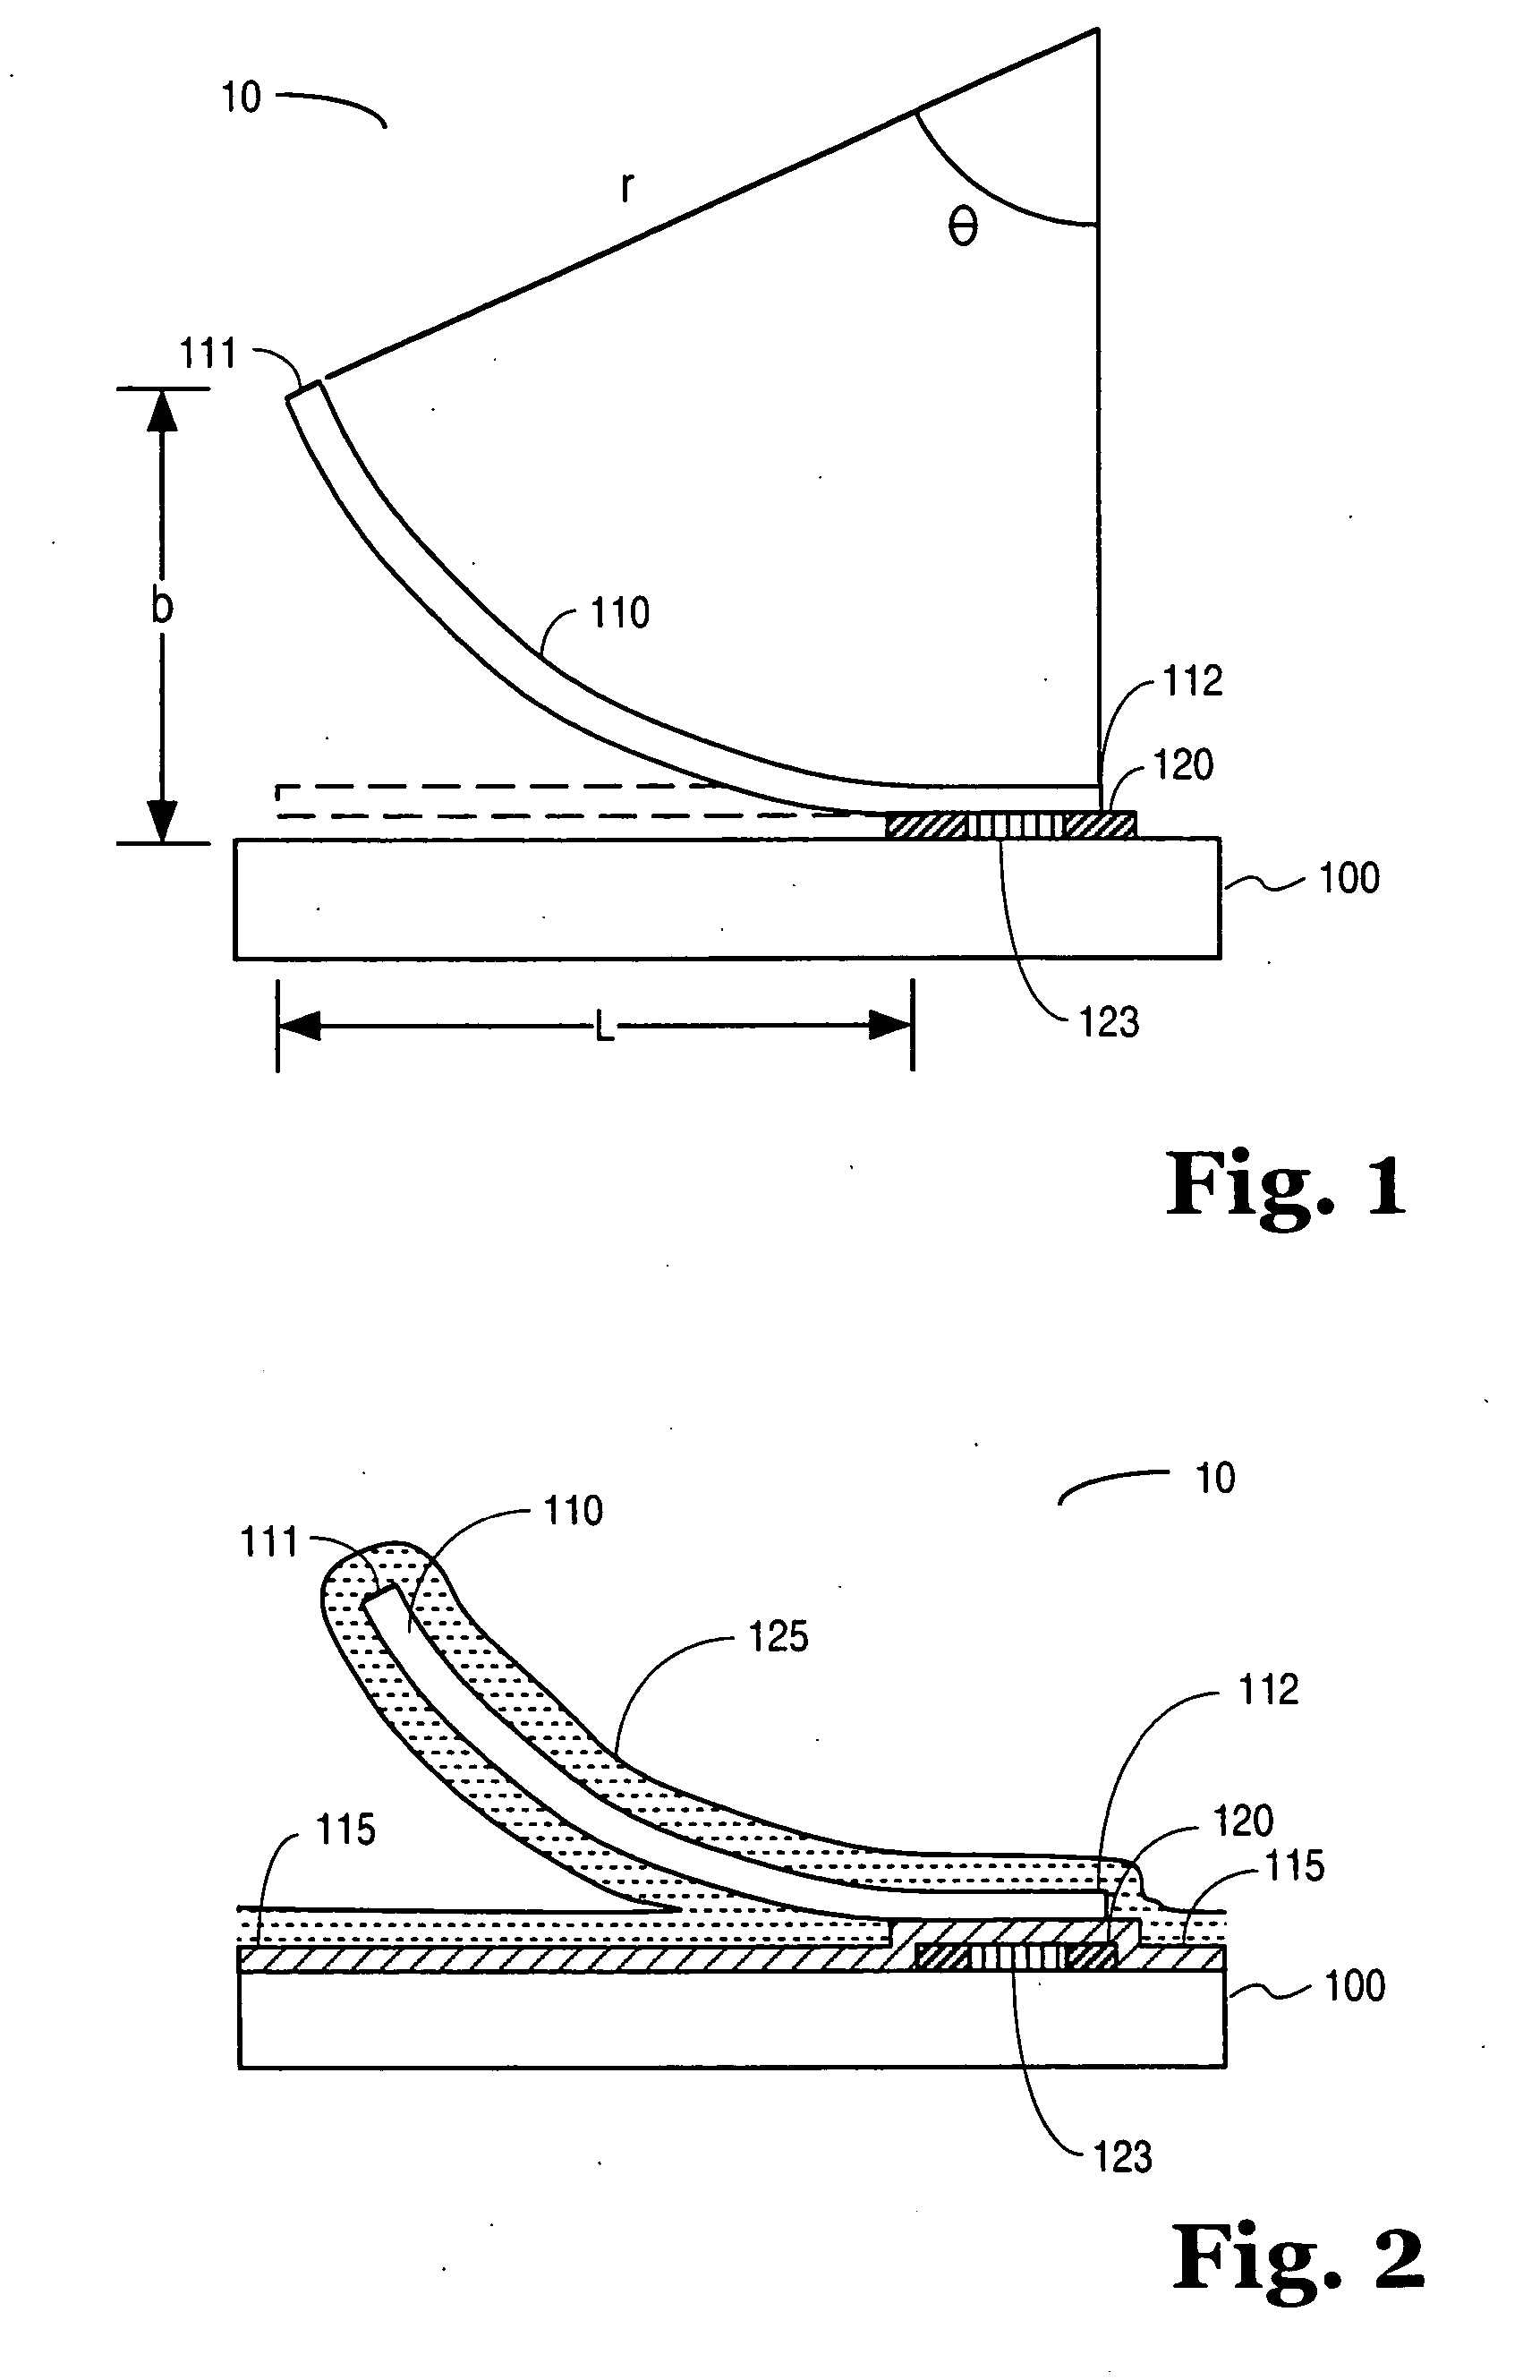 Interconnect for microelectronic structures with enhanced spring characteristics